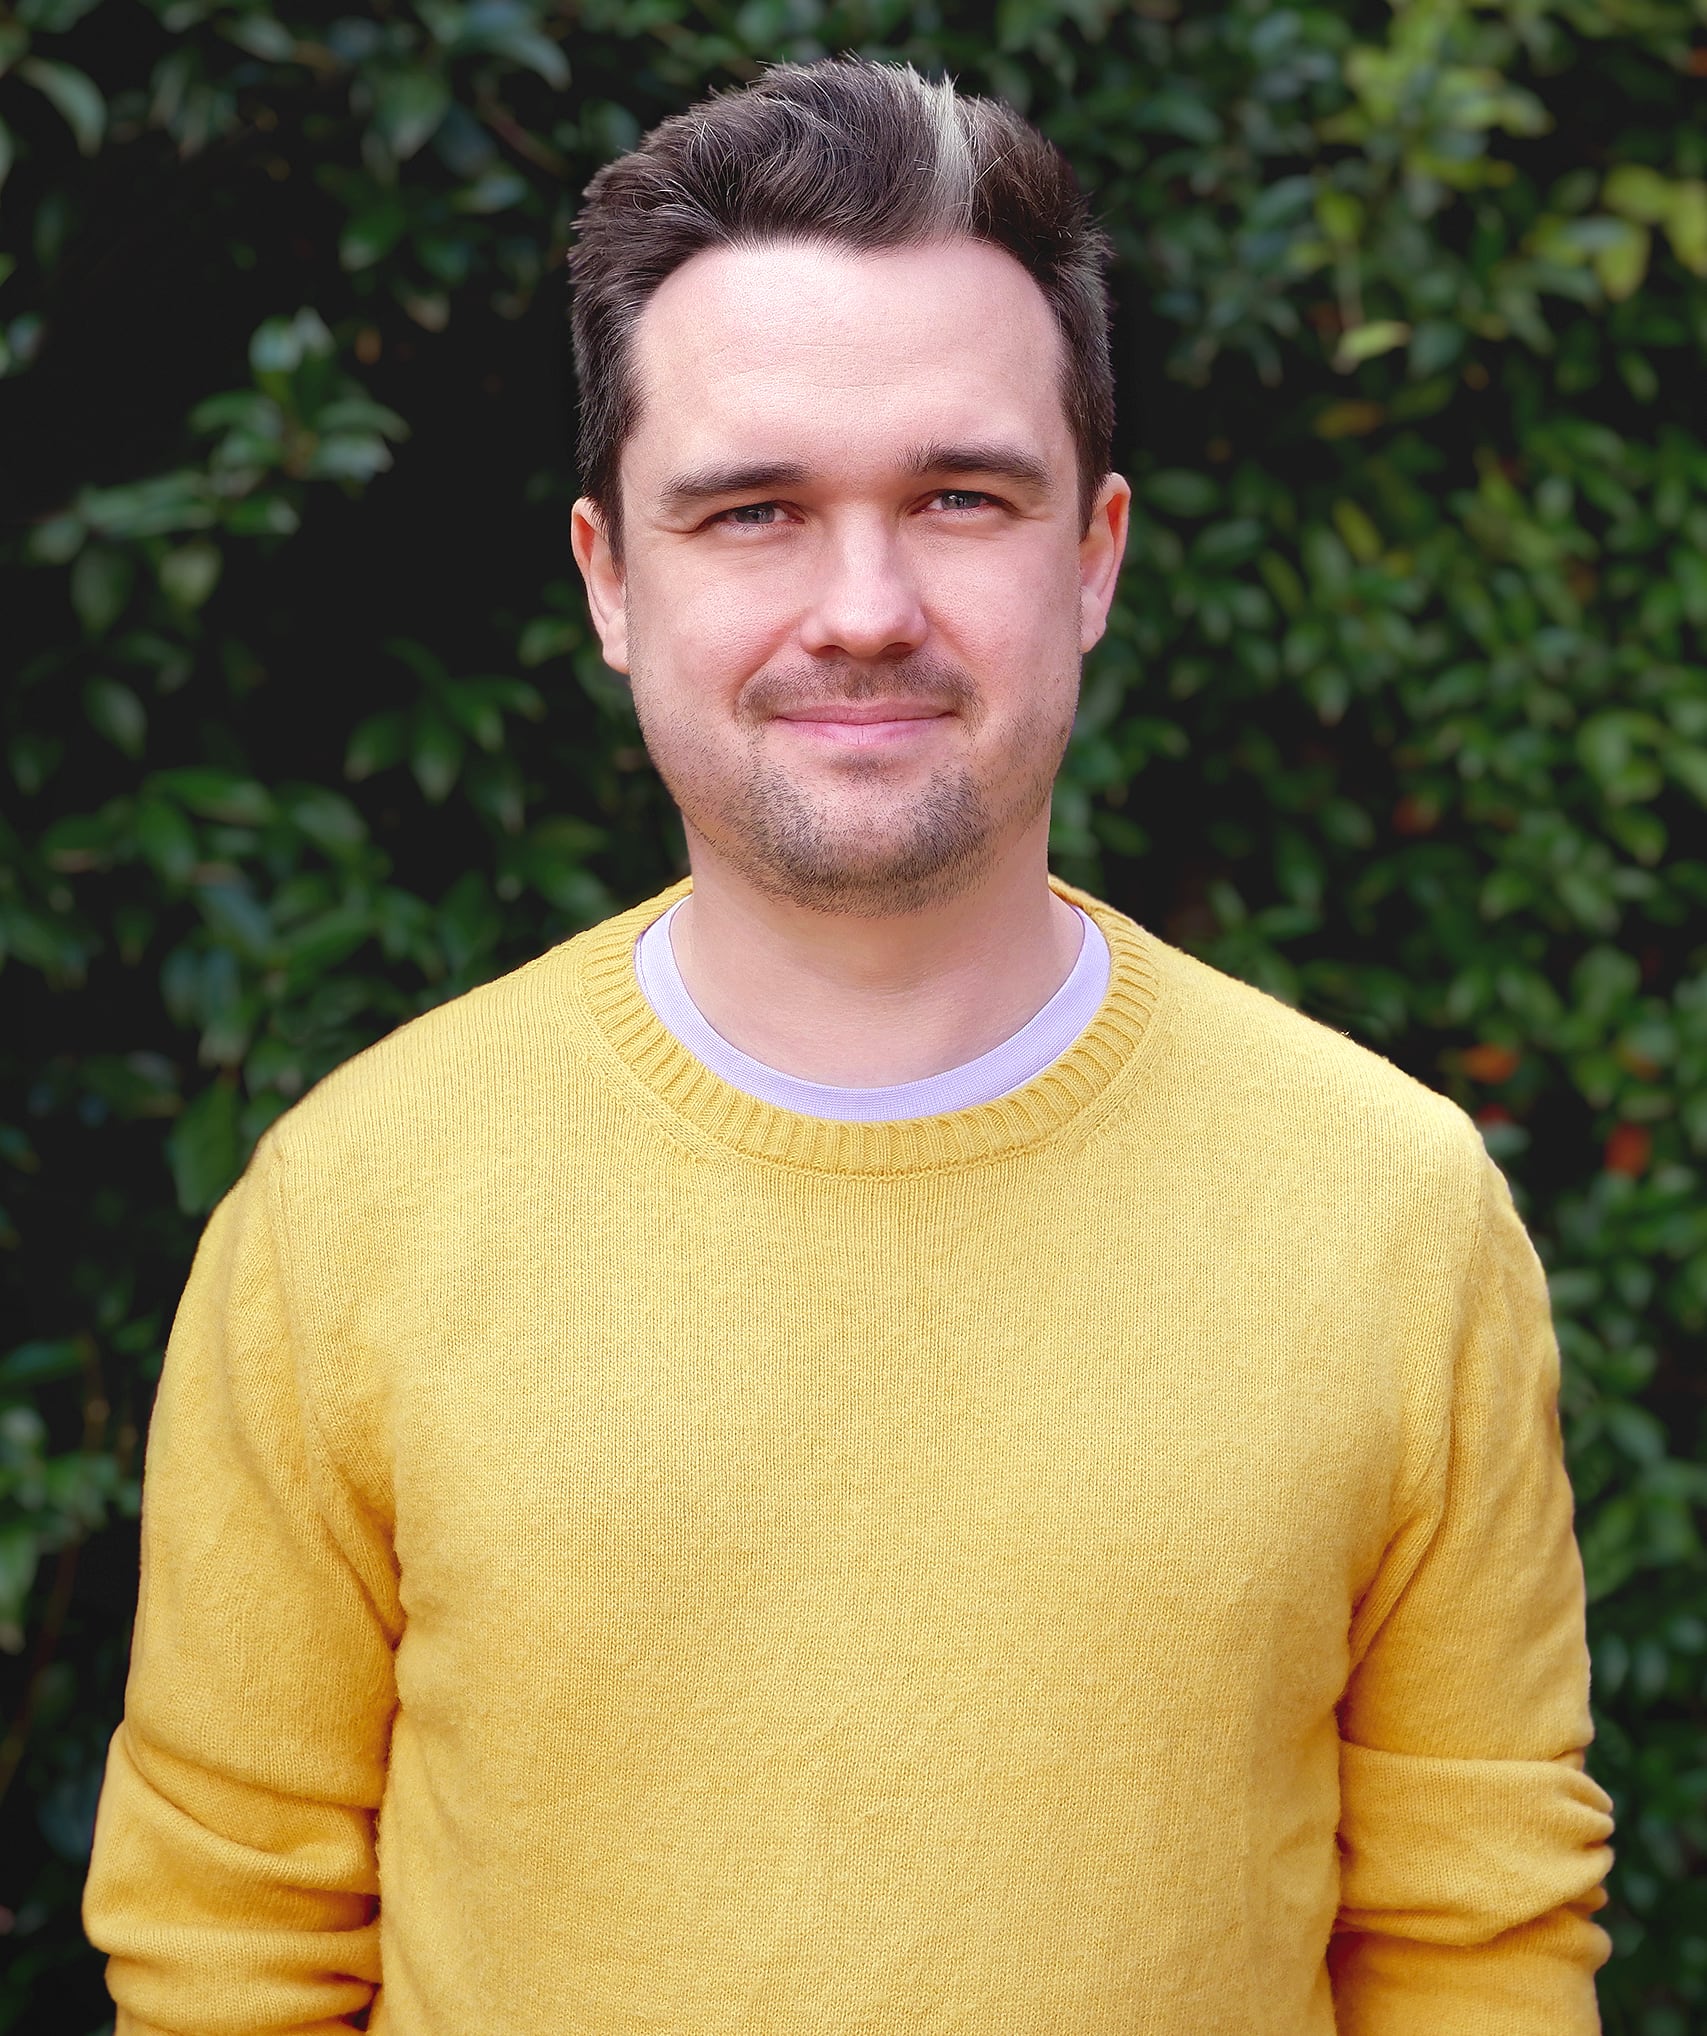 A picture of Elliot Midson wearing a yellow jumper in front of a green hedge.